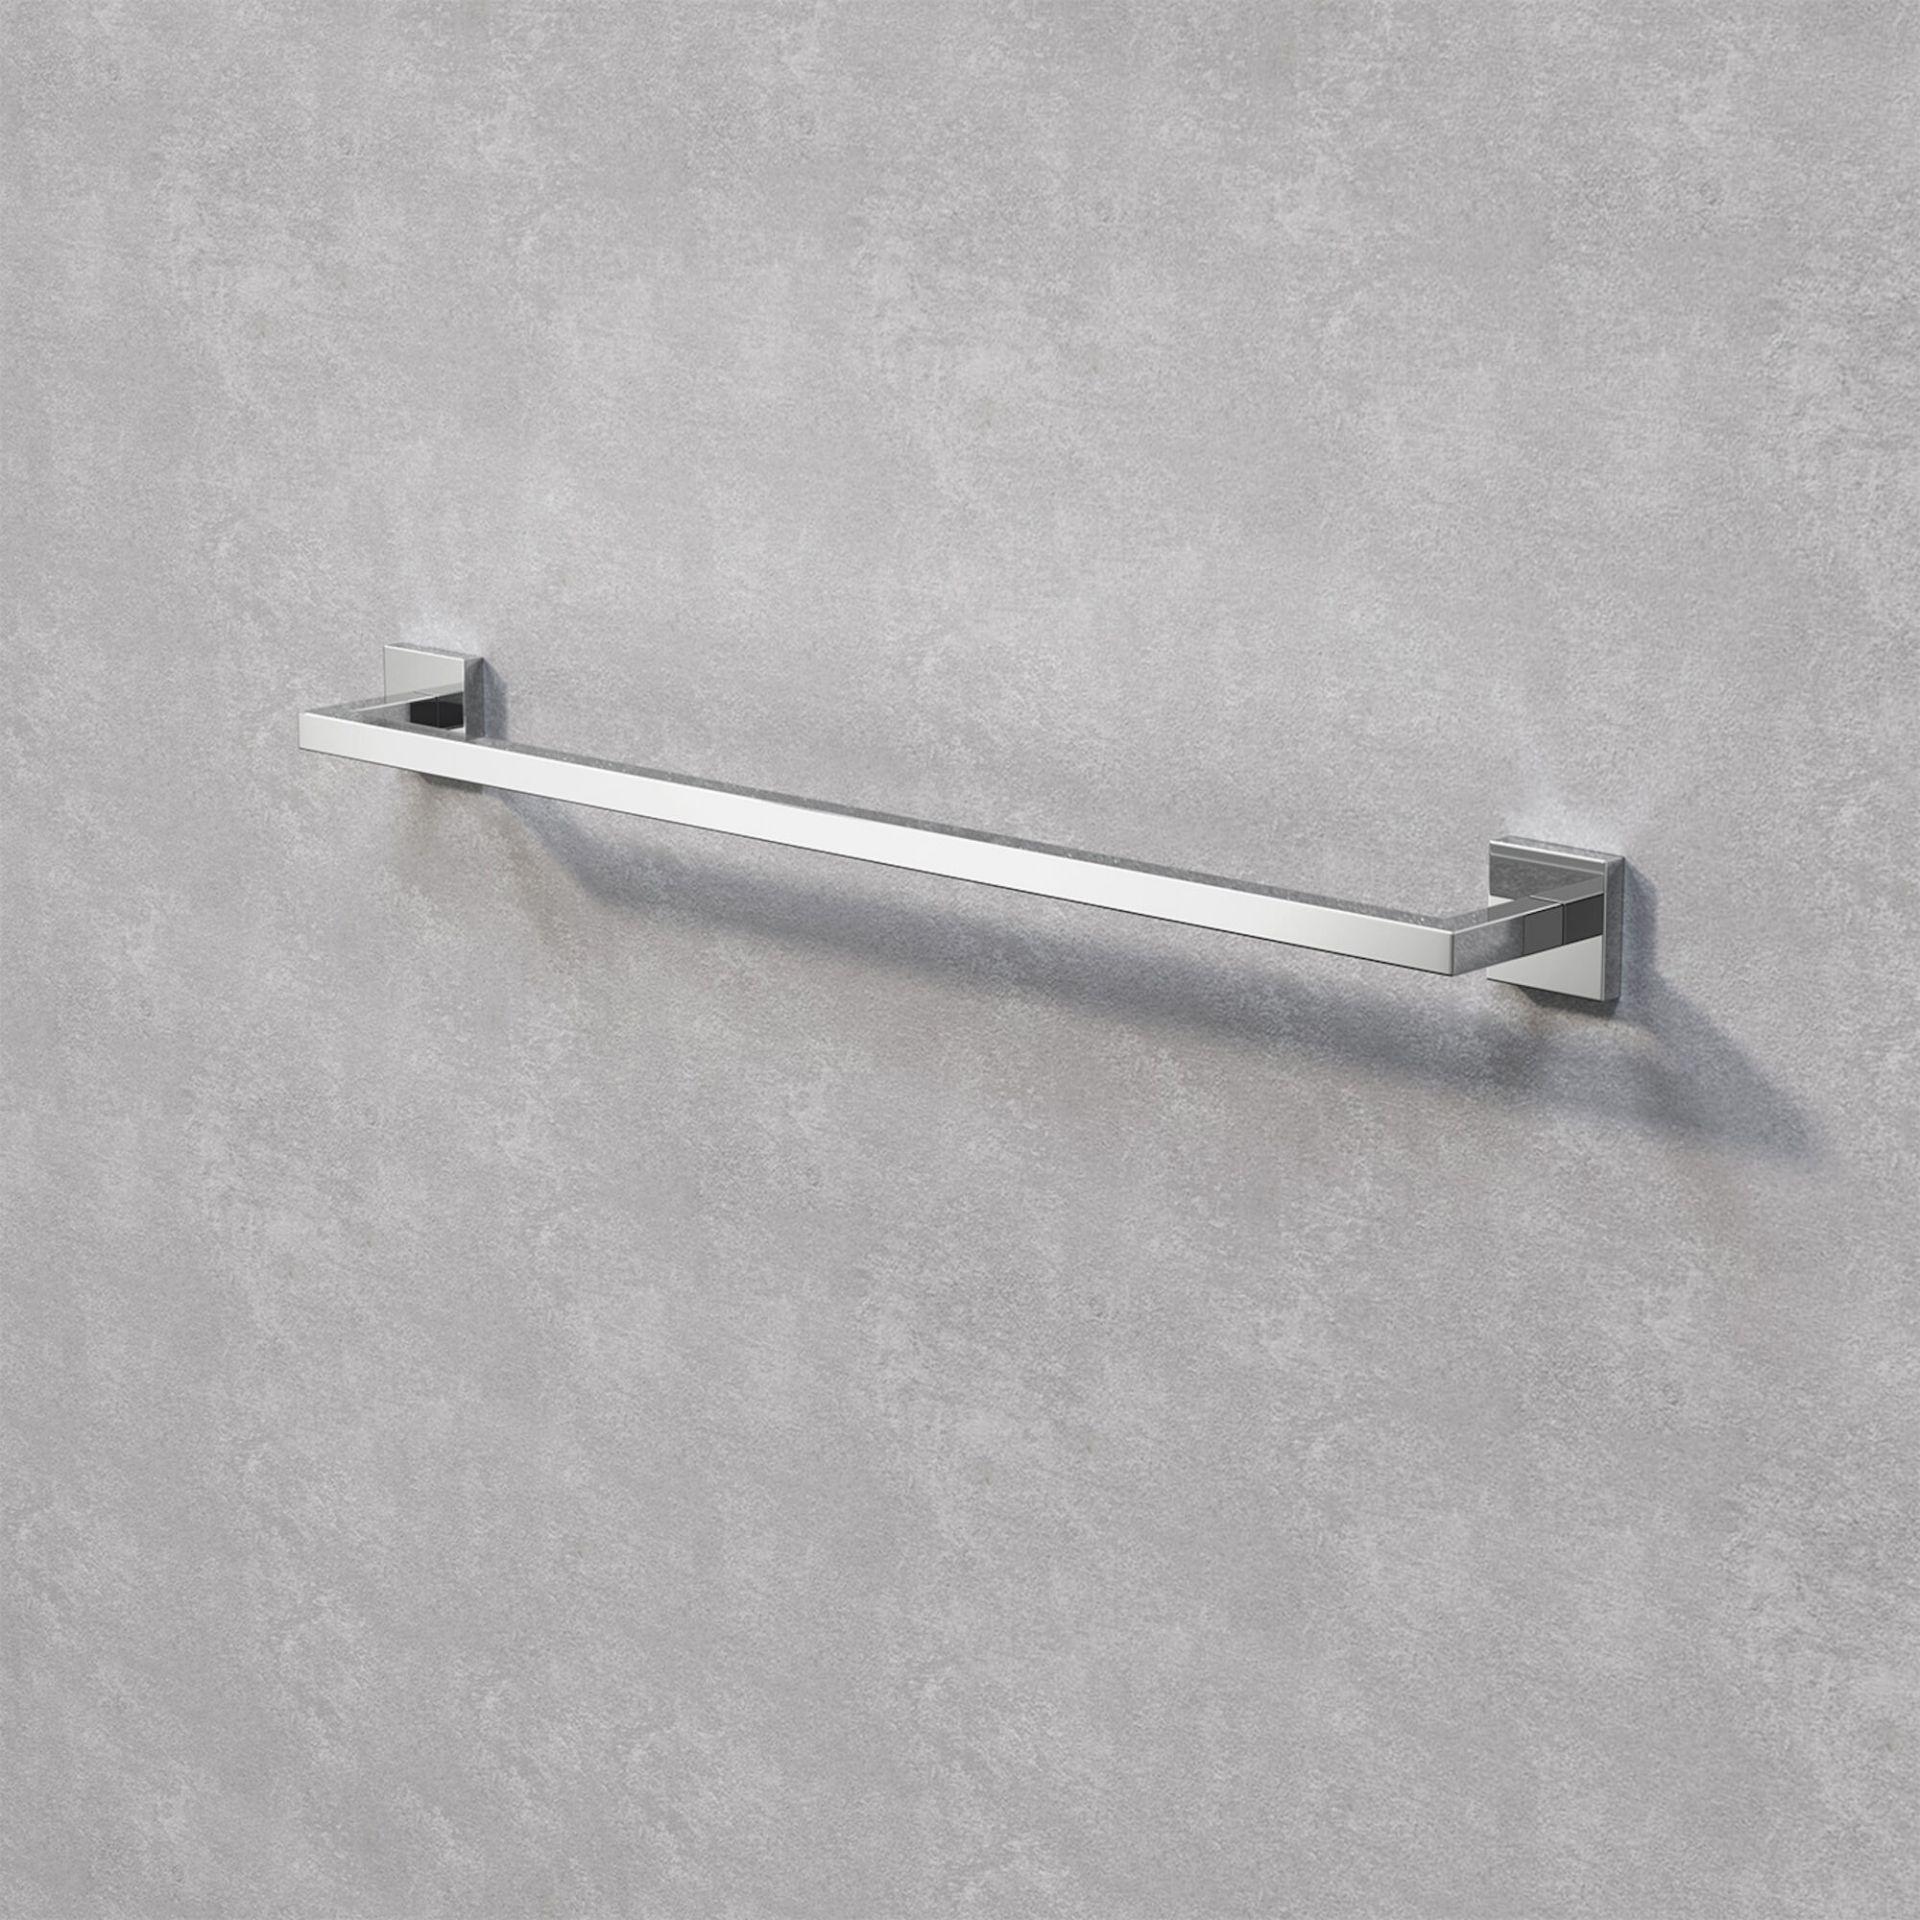 (RK1040) Jesmond Towel Rail Finishes your bathroom with a little extra functionality and style...